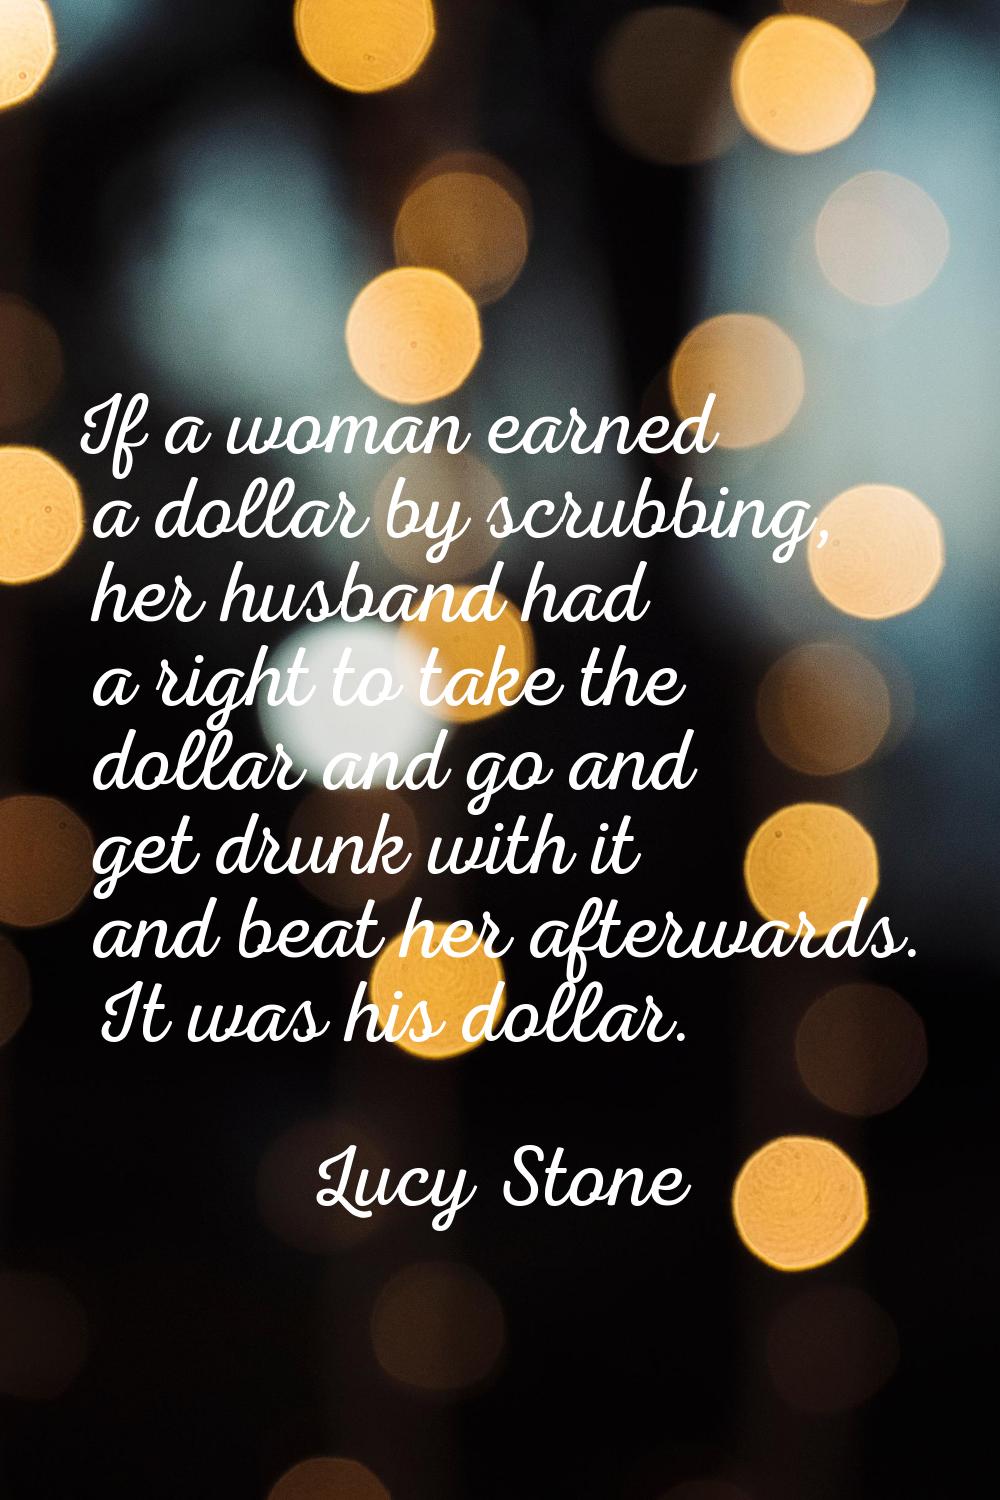 If a woman earned a dollar by scrubbing, her husband had a right to take the dollar and go and get 